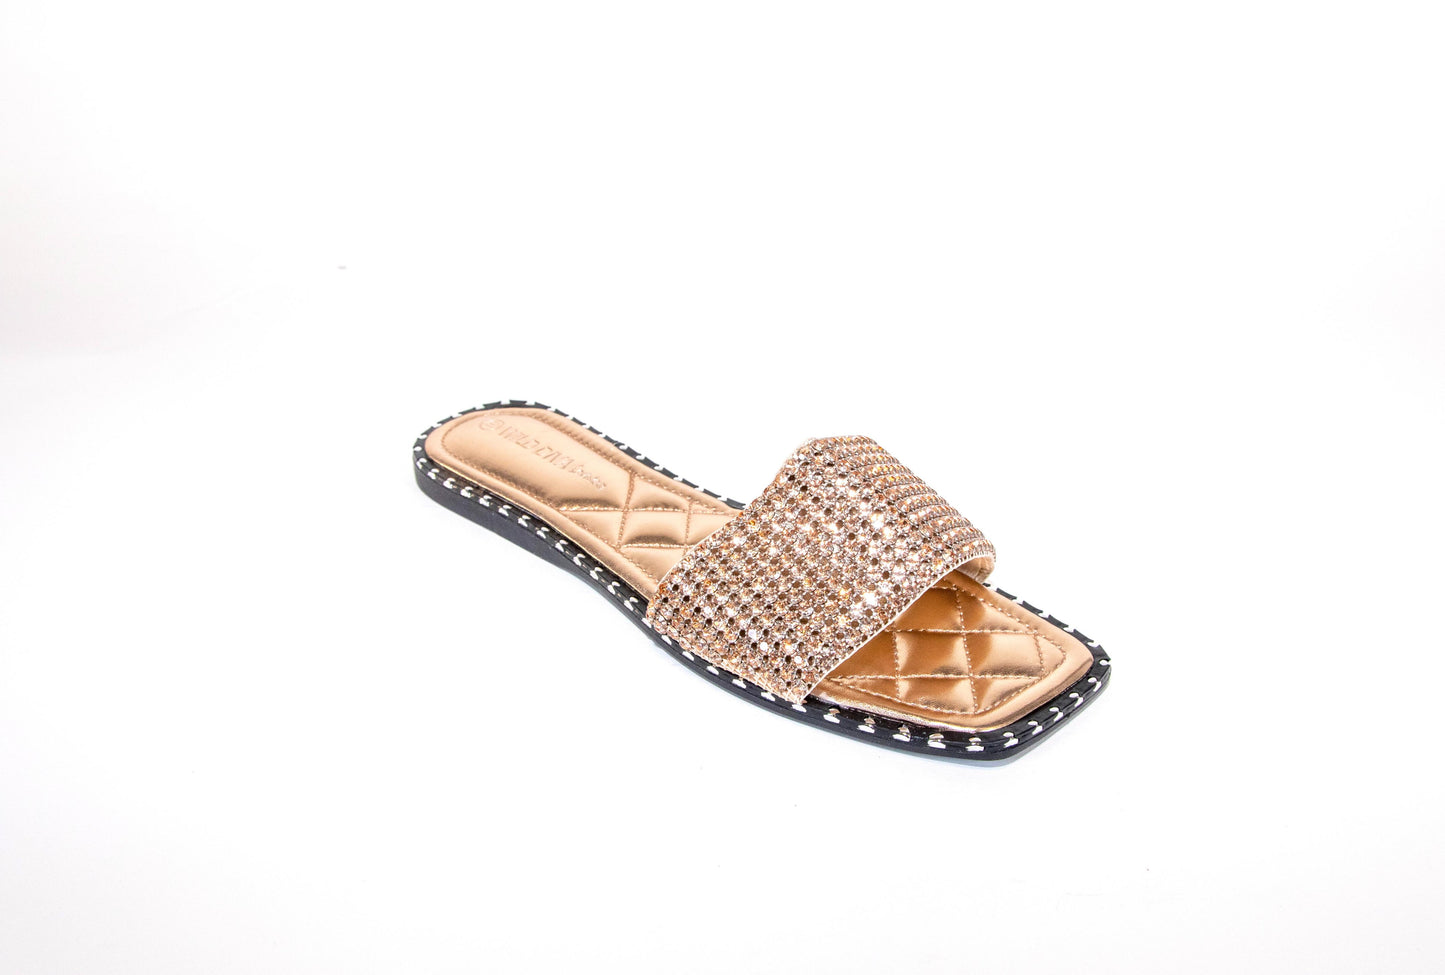 Snowy-05 Quilted Pillowy Sole Sandal